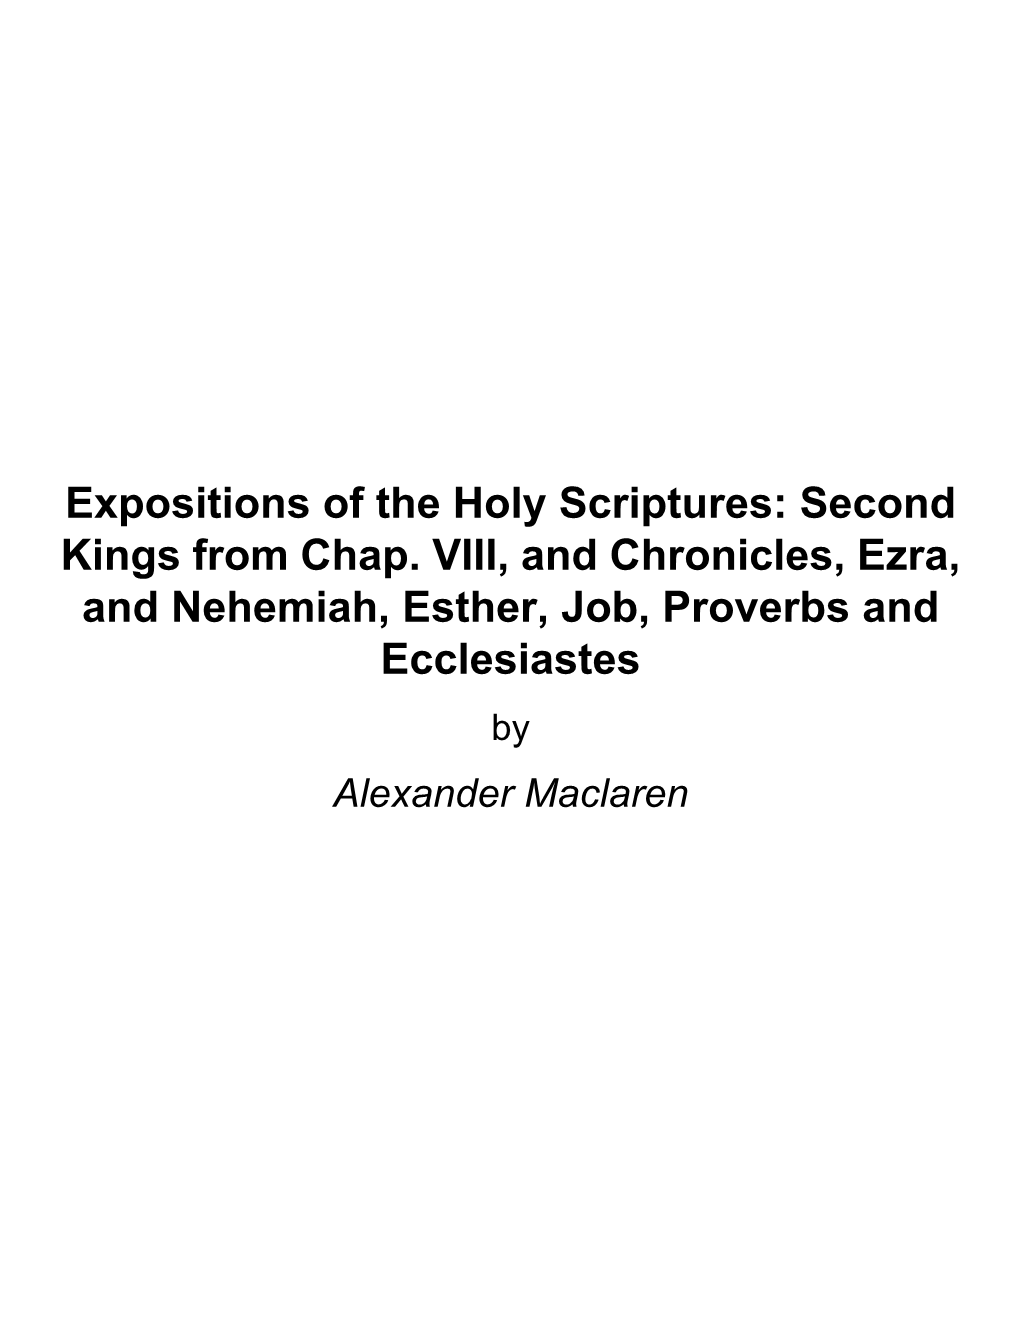 Expositions of the Holy Scriptures: Second Kings from Chap. VIII, And